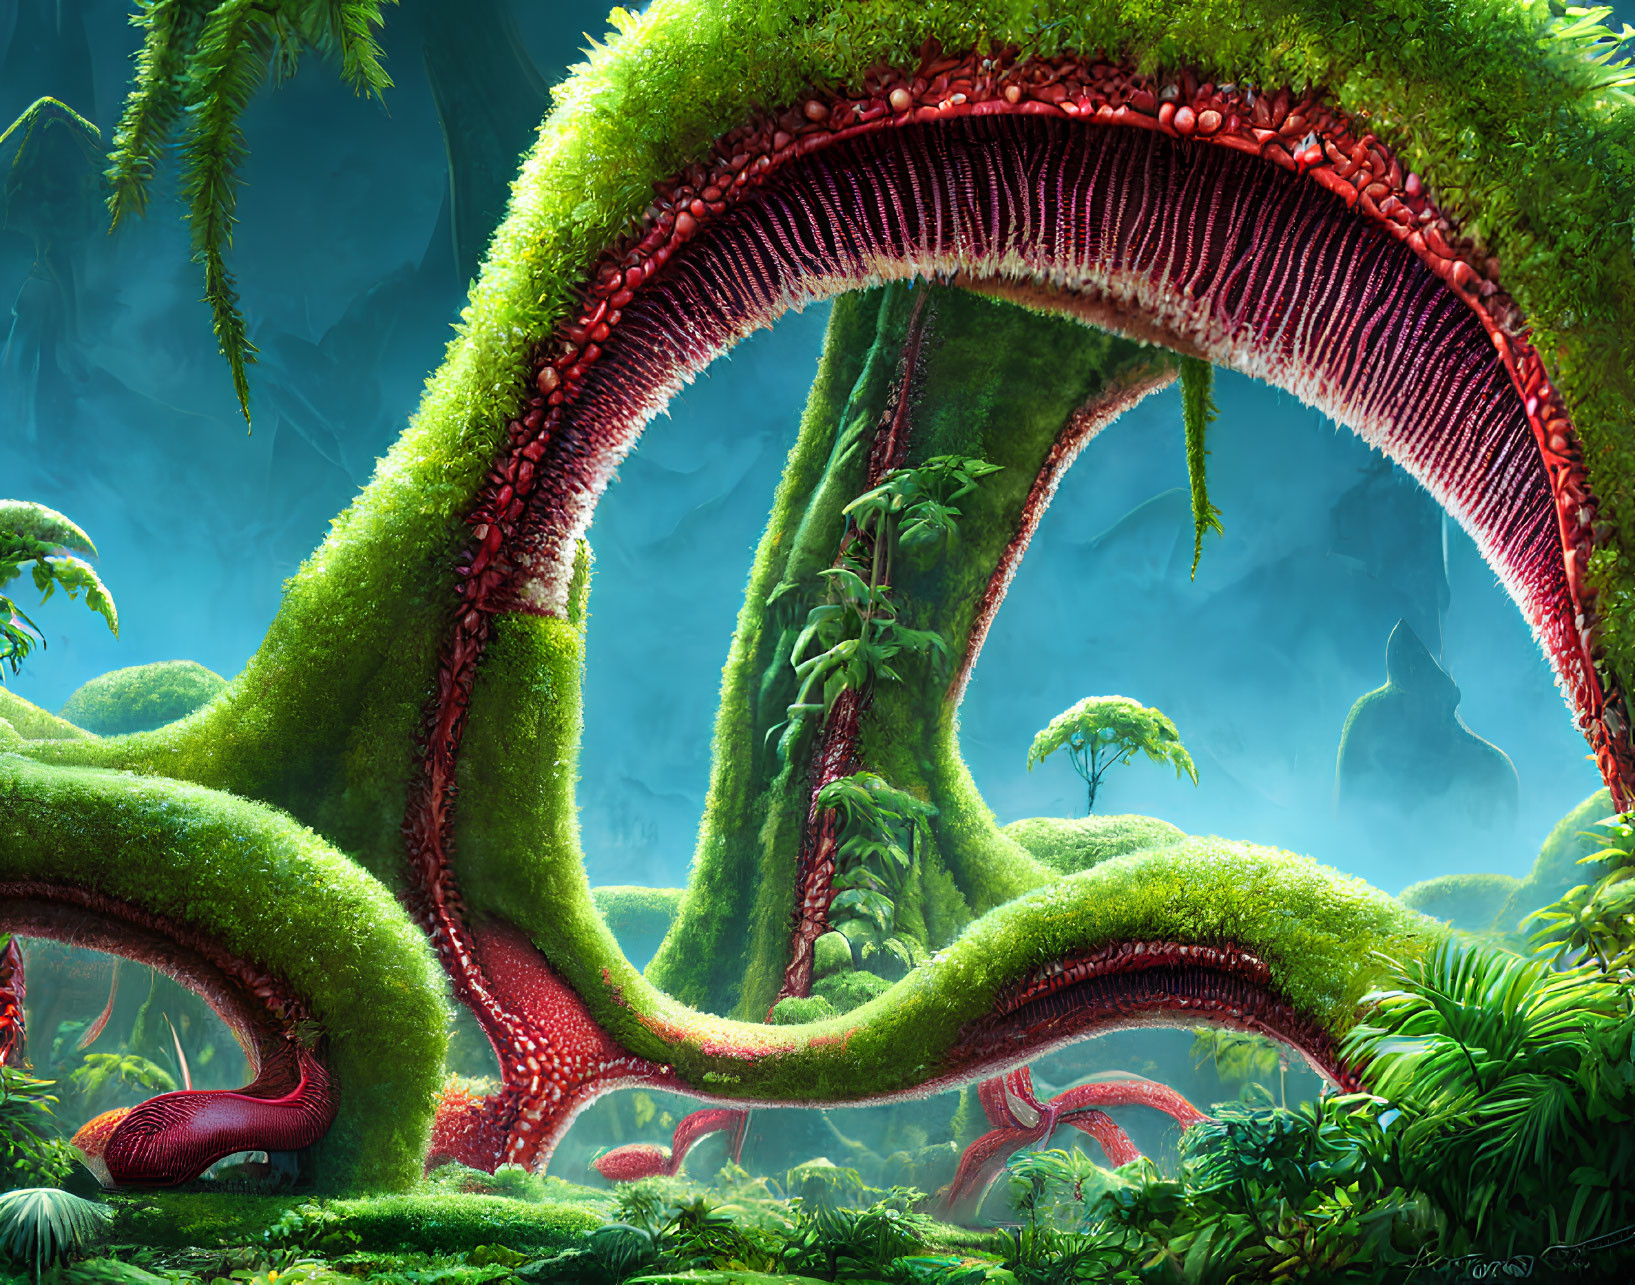 Fantastical jungle with oversized green plants and red arches